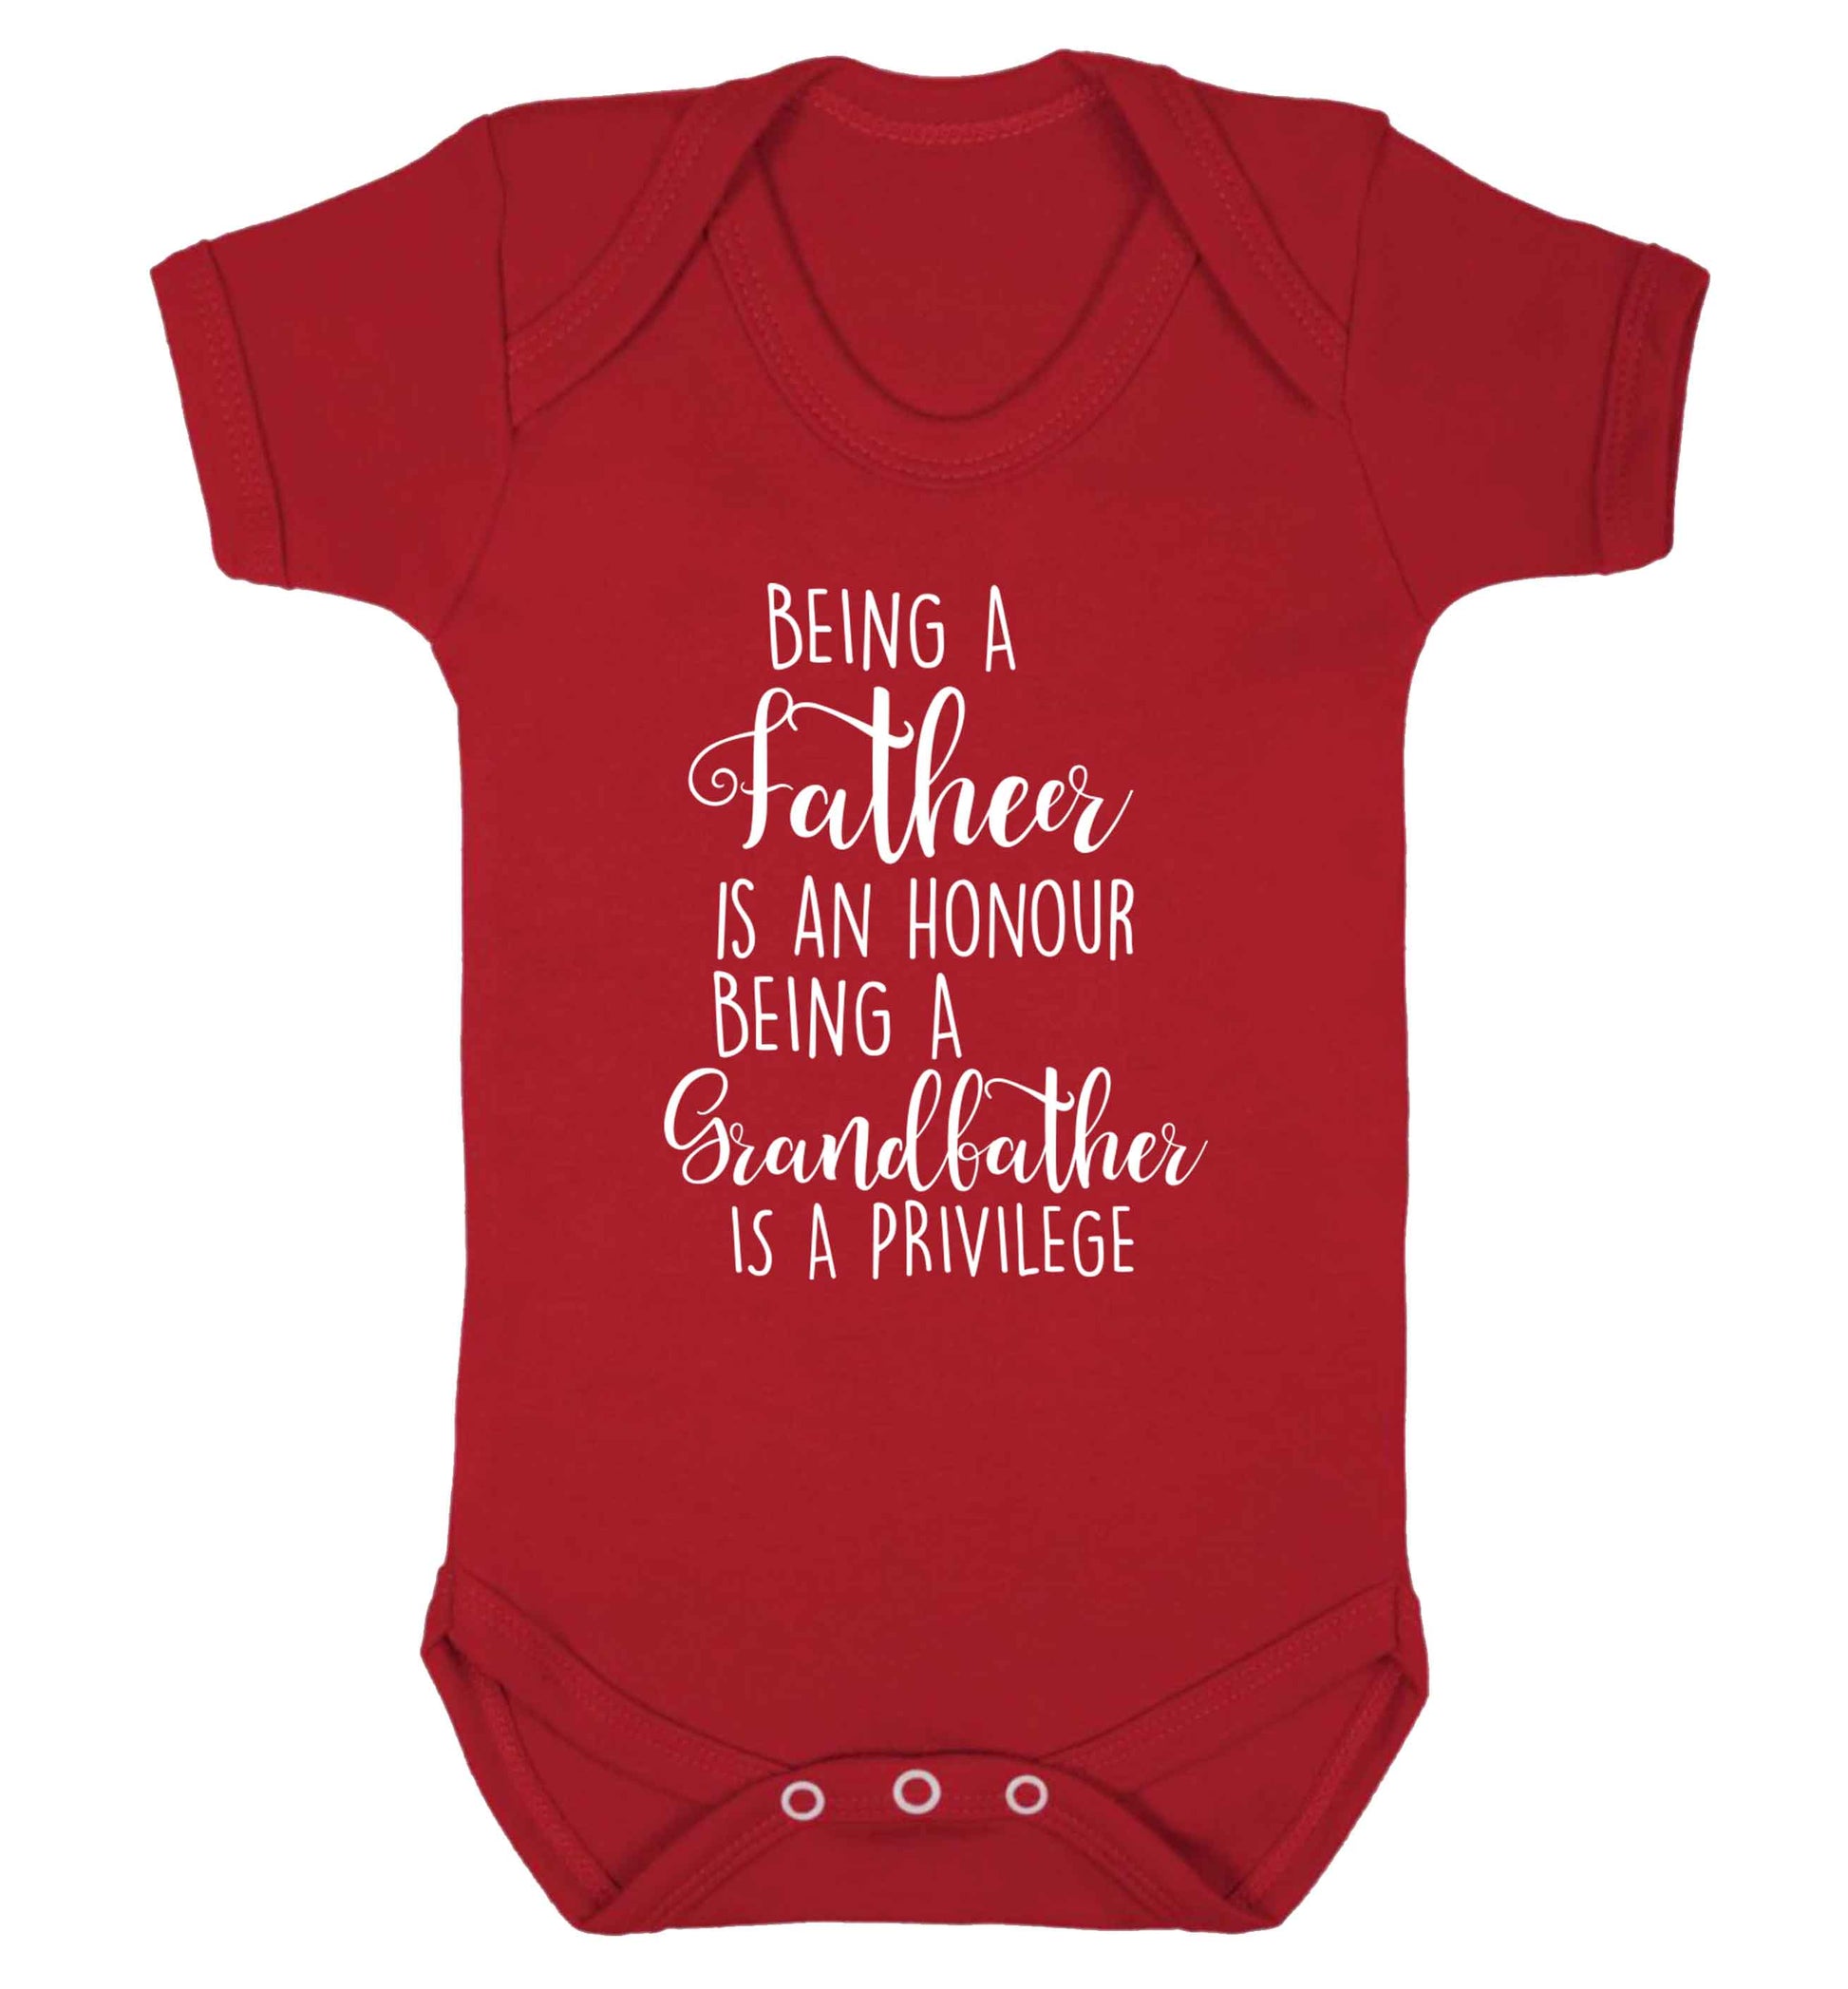 Being a father is an honour being a grandfather is a privilege Baby Vest red 18-24 months